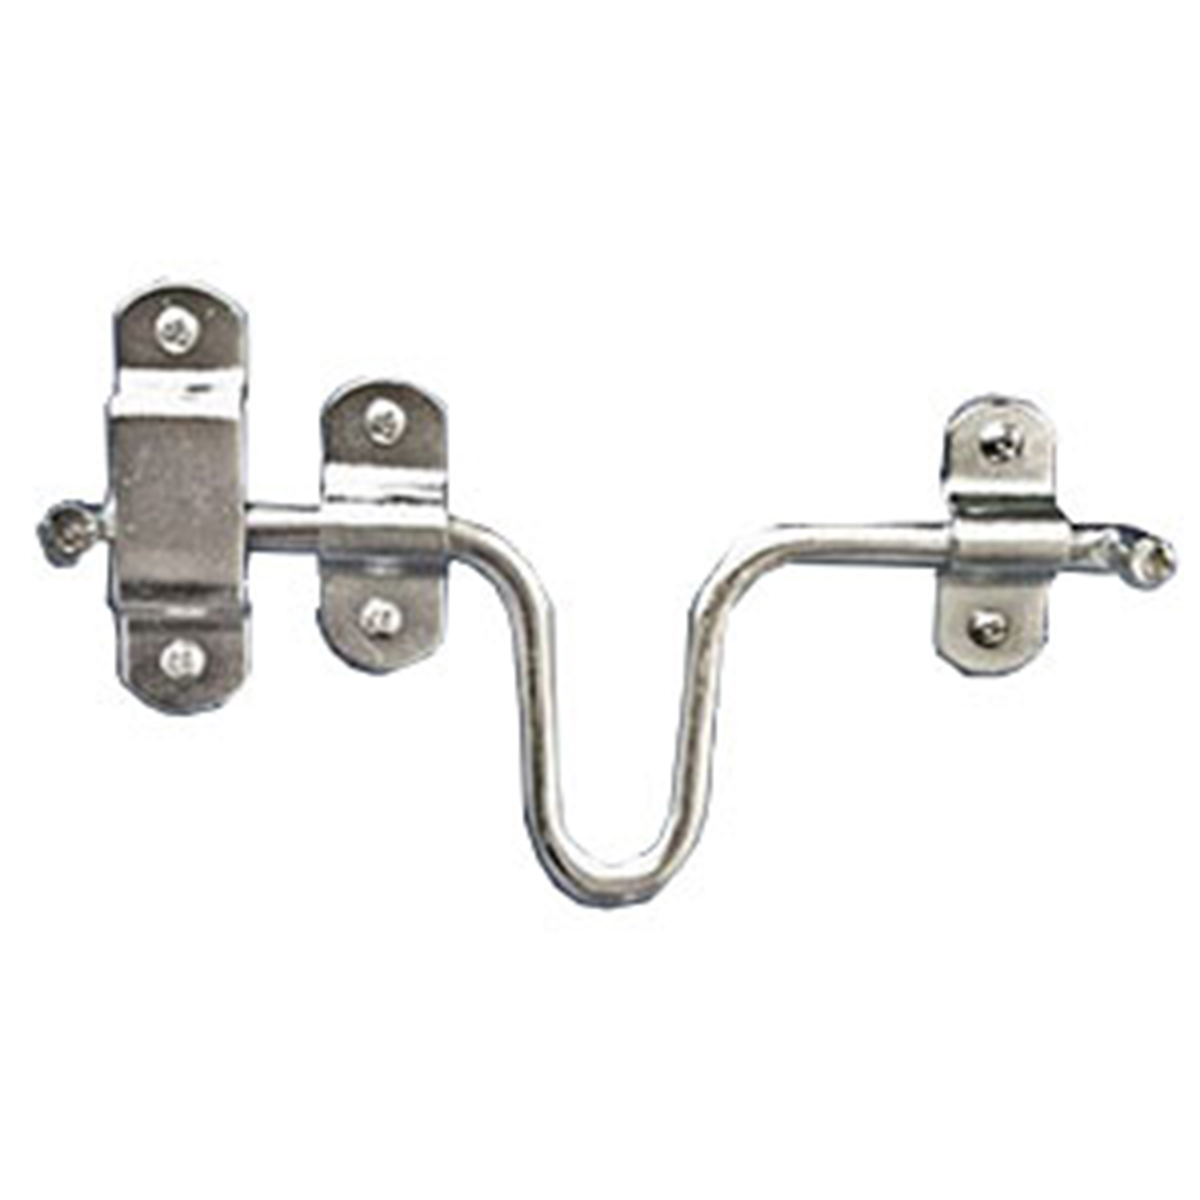 Cannonball Gate, Stall and Door Latch